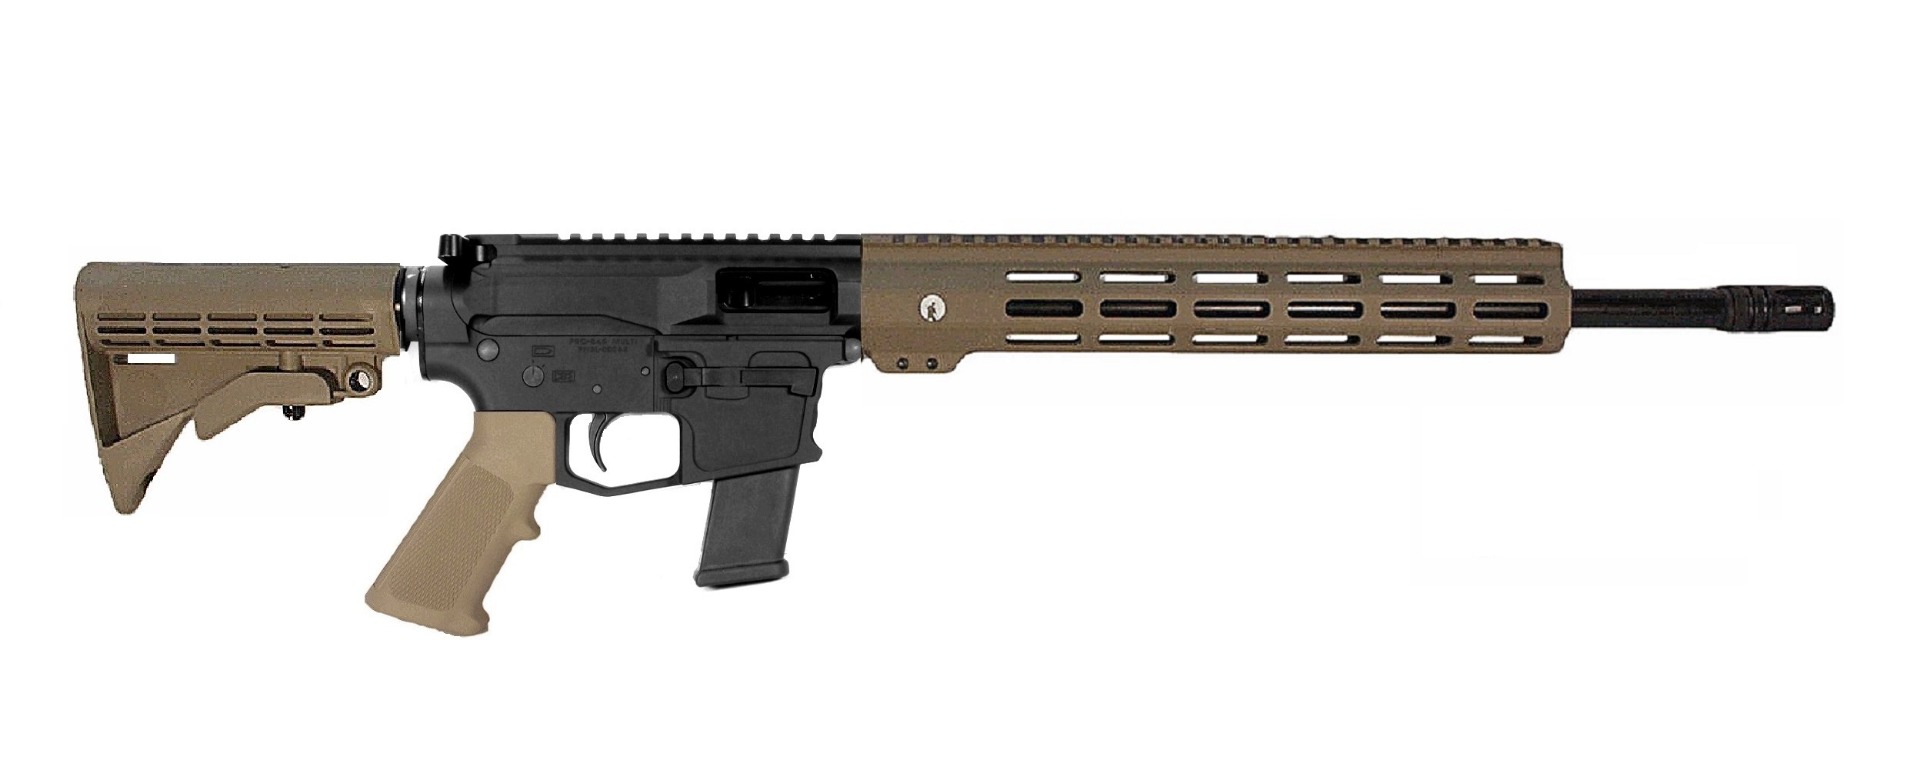 16 inch 9mm AR9 Rifle in BLK/FDE Color 